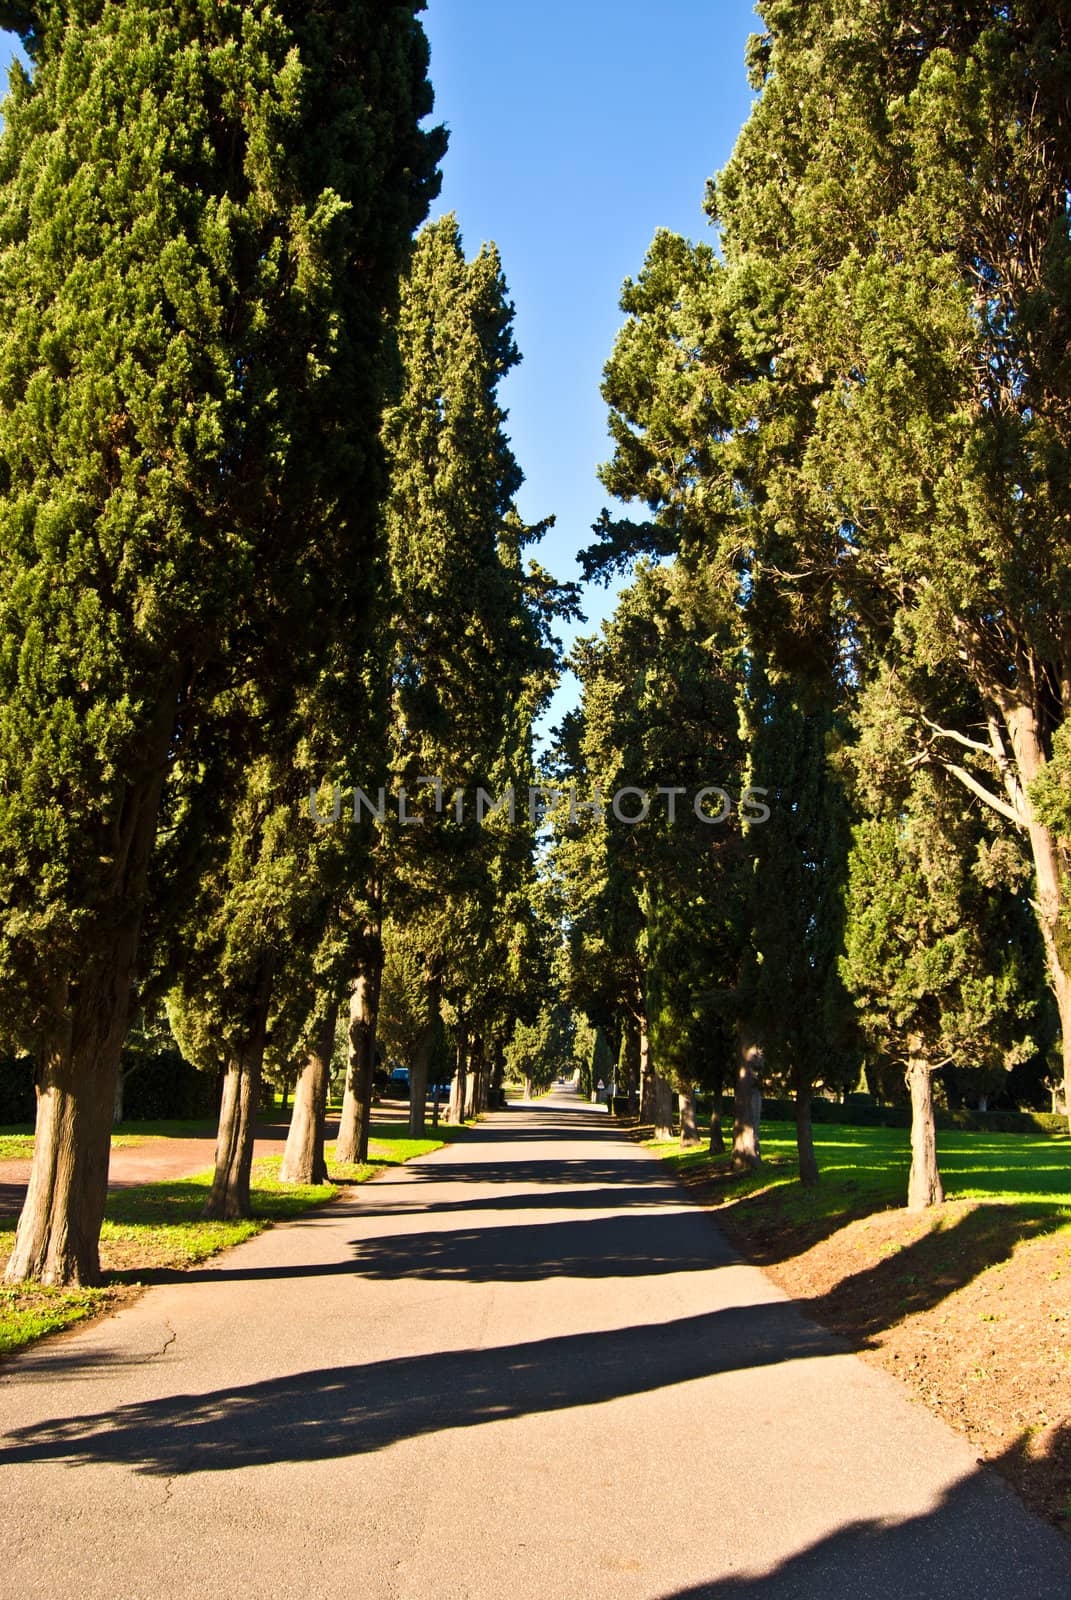 famous roman road with cypress trees on either side